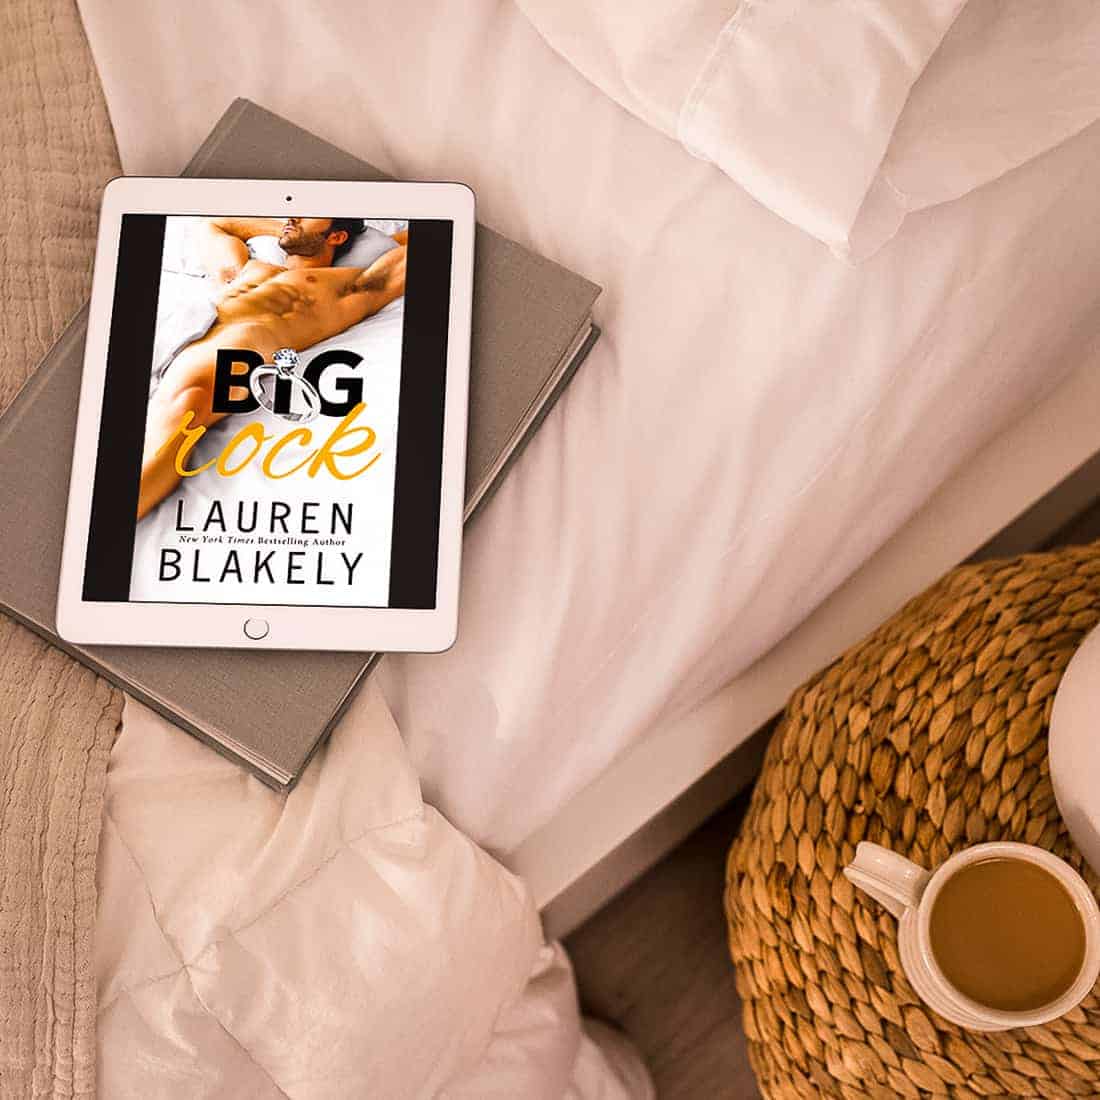 Big Rock by Lauren Blakely is a standalone romantic comedy told from the hero's point of view is full of hot characters, steamy scenes, fantastic banter, and excellent writing!